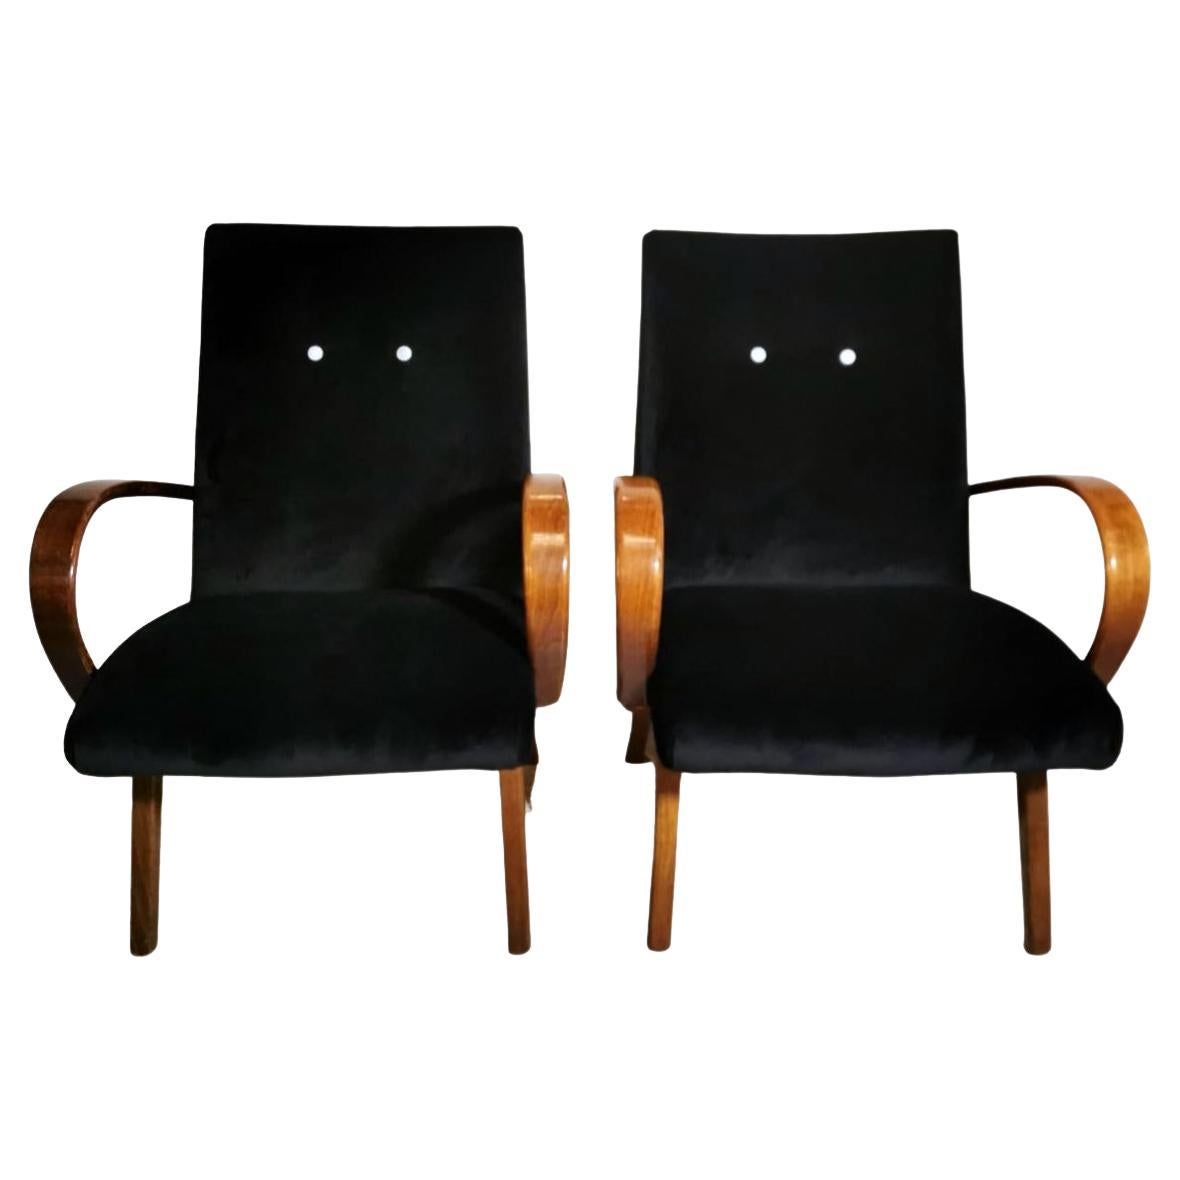 Jindrich Halabala Attributed Pair Of Czechoslovakian Art Deco Armchairs. For Sale